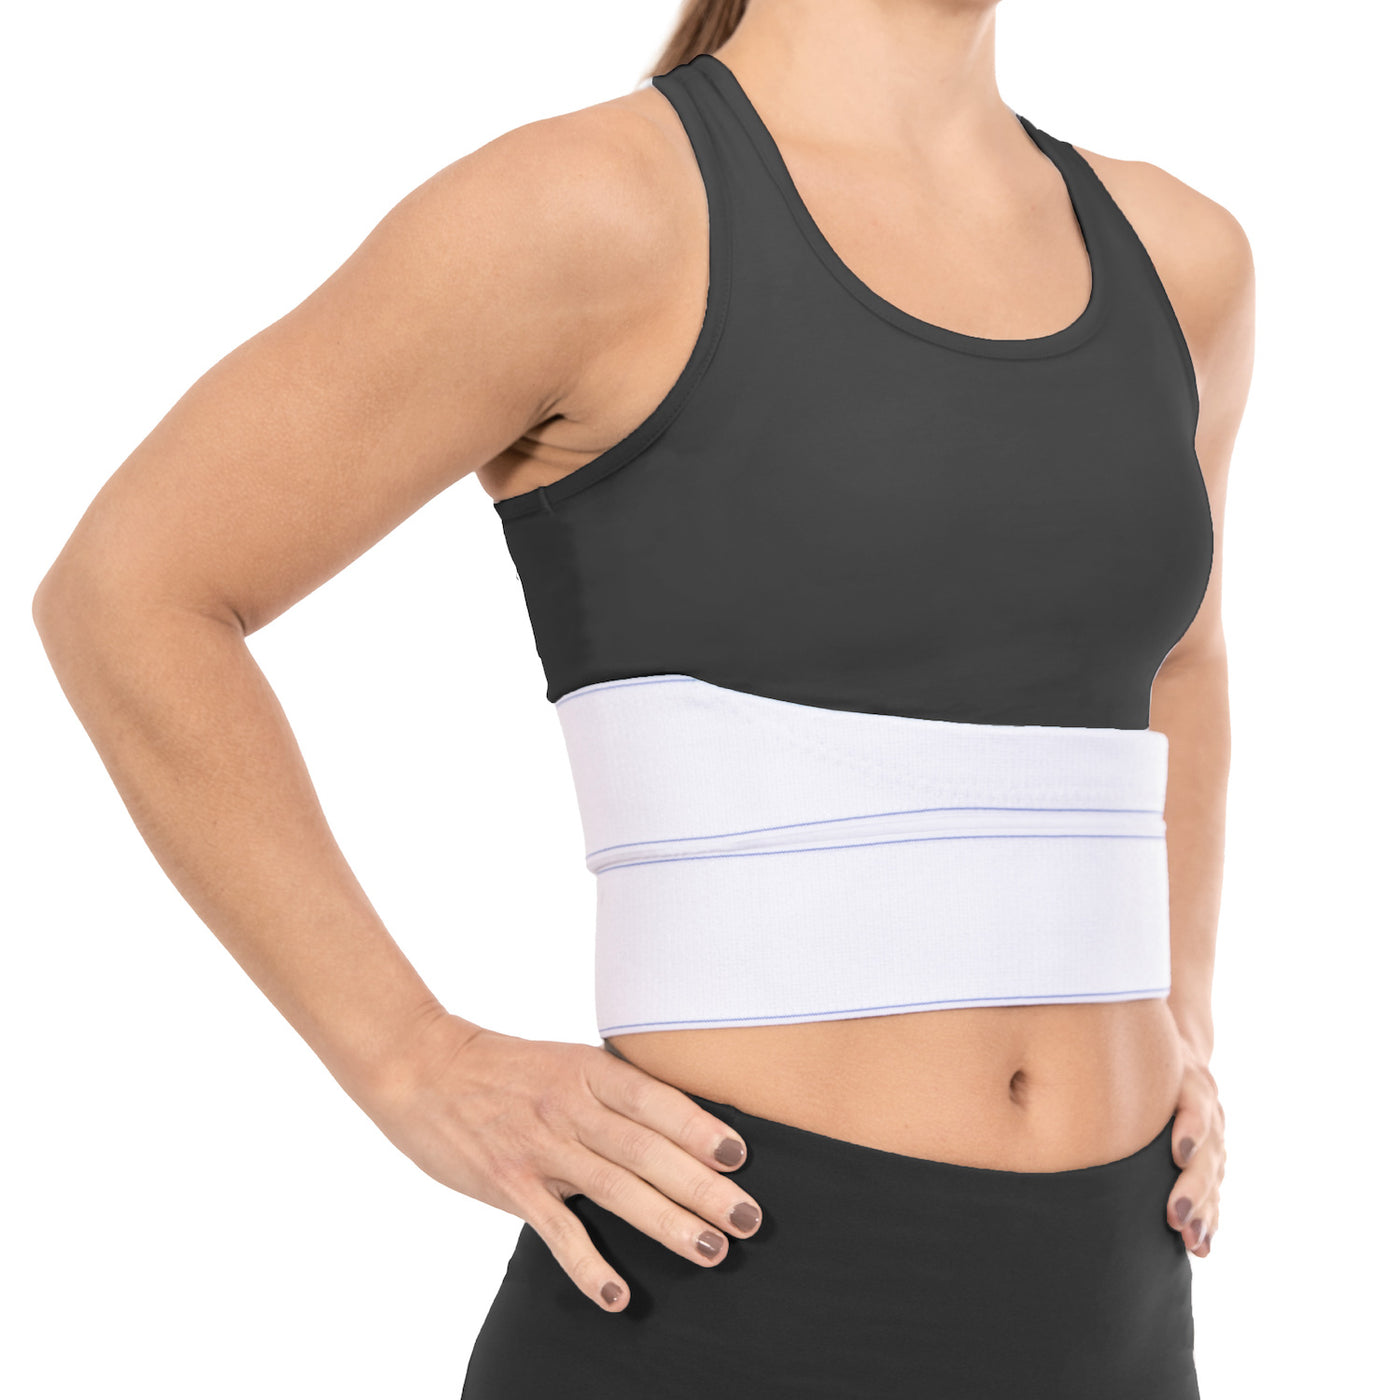 Rib Fracture Support Brace, Breathable Rib Fracture Fixed Belt